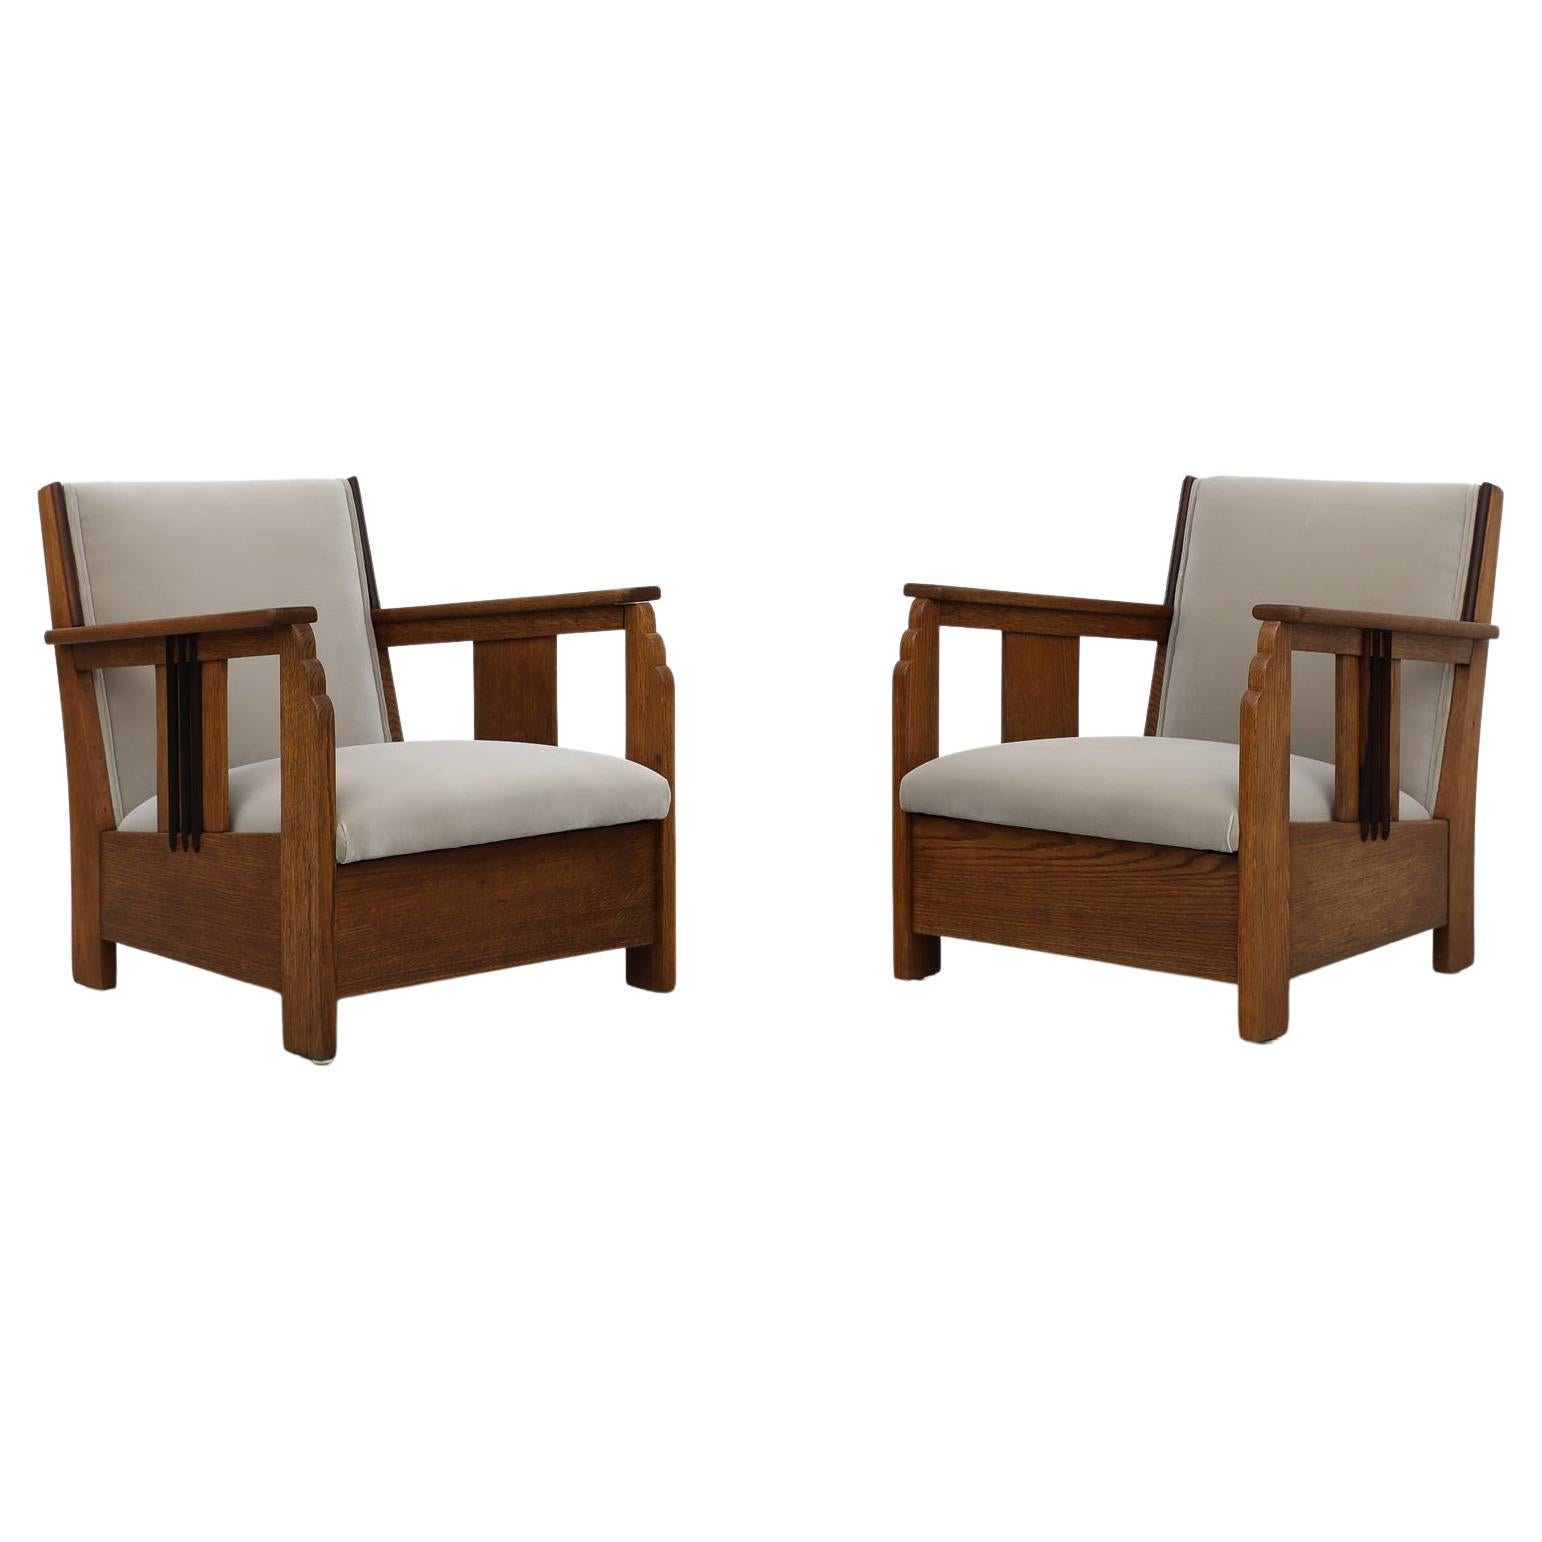 Pair of Oak Art Deco Lounge Chairs with New Upholstery